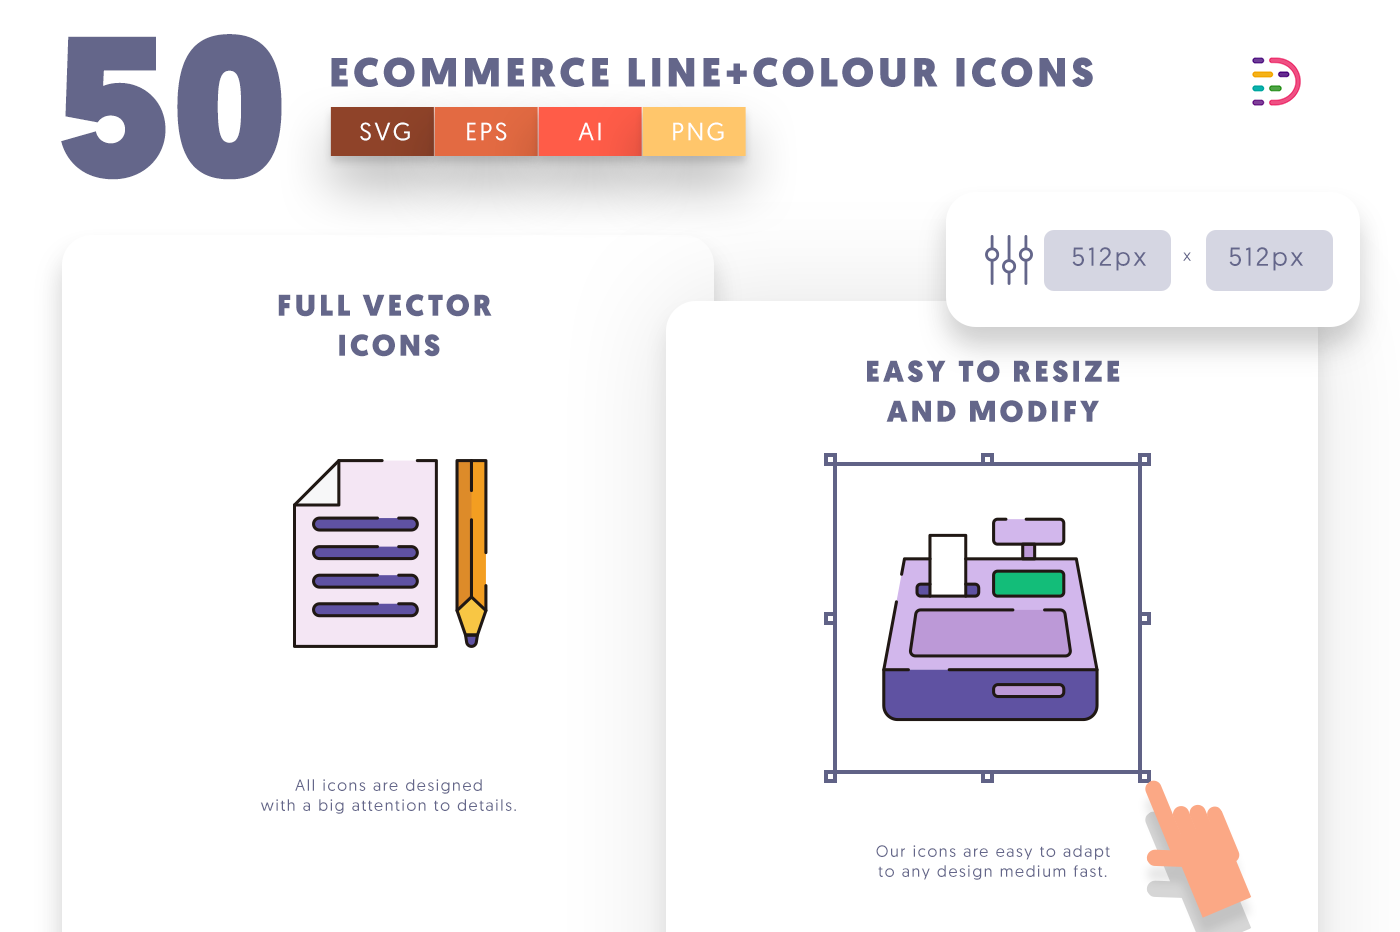 Full vector 50EcommerceLine+Colour Icons